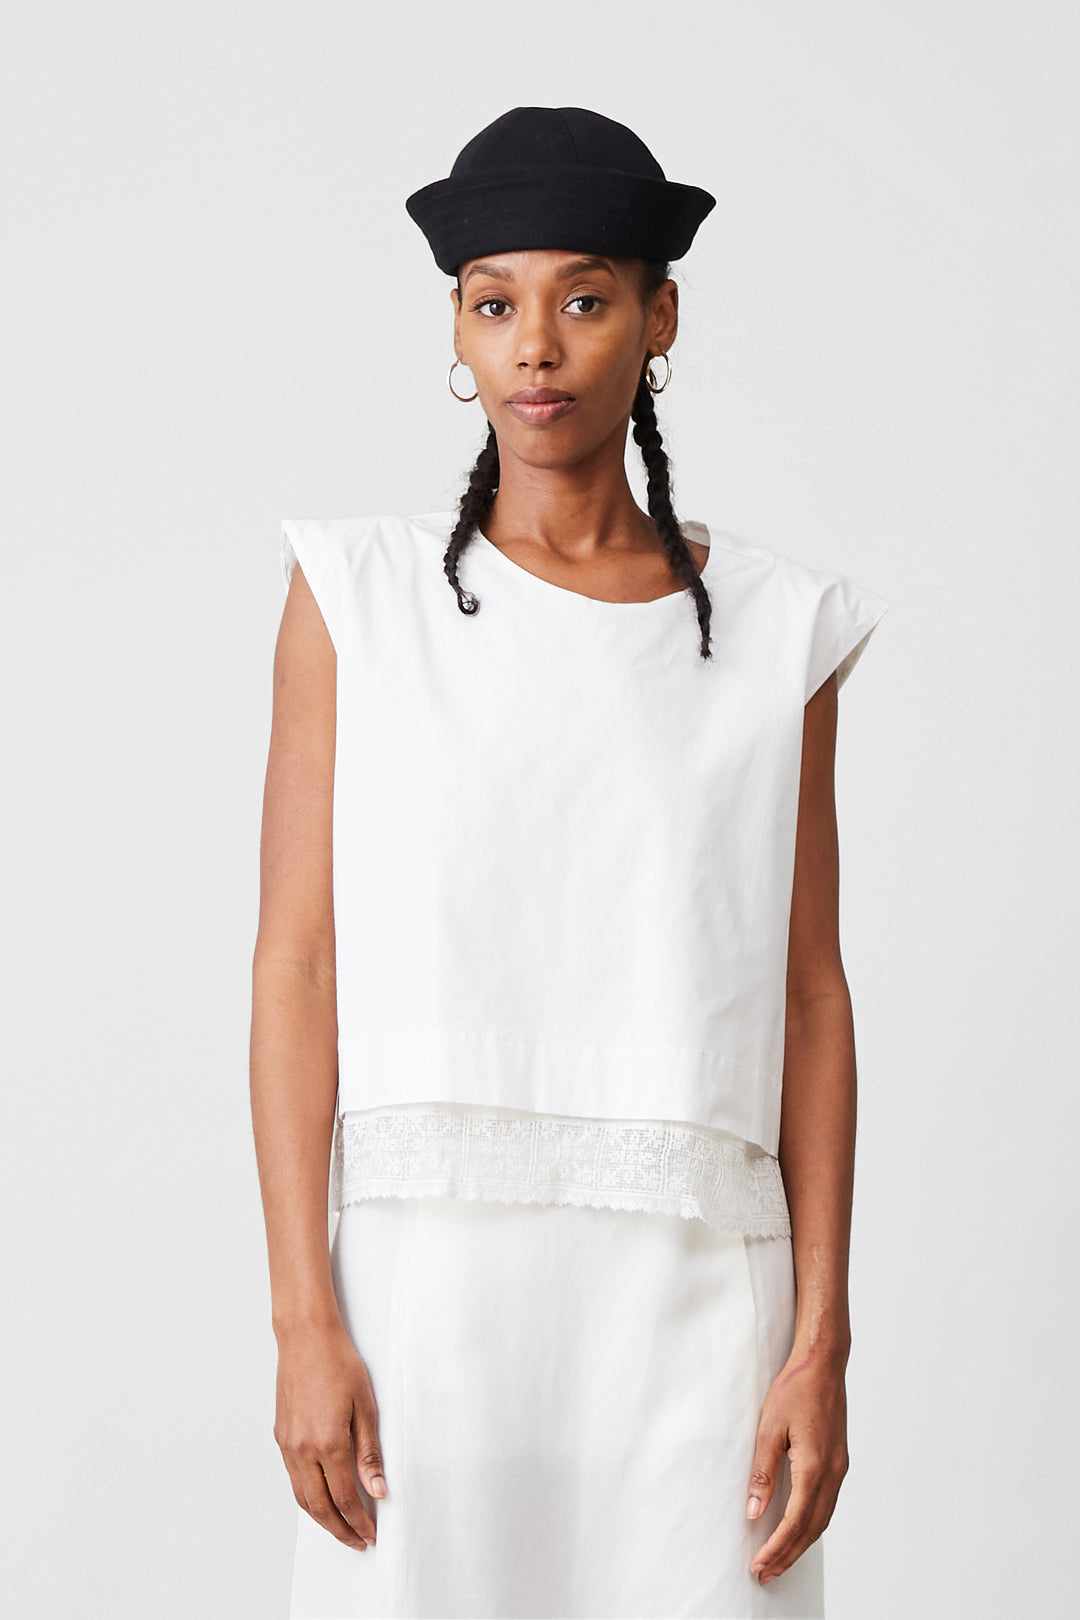 Lucy Top in White Poplin Lace by Caron Callahan